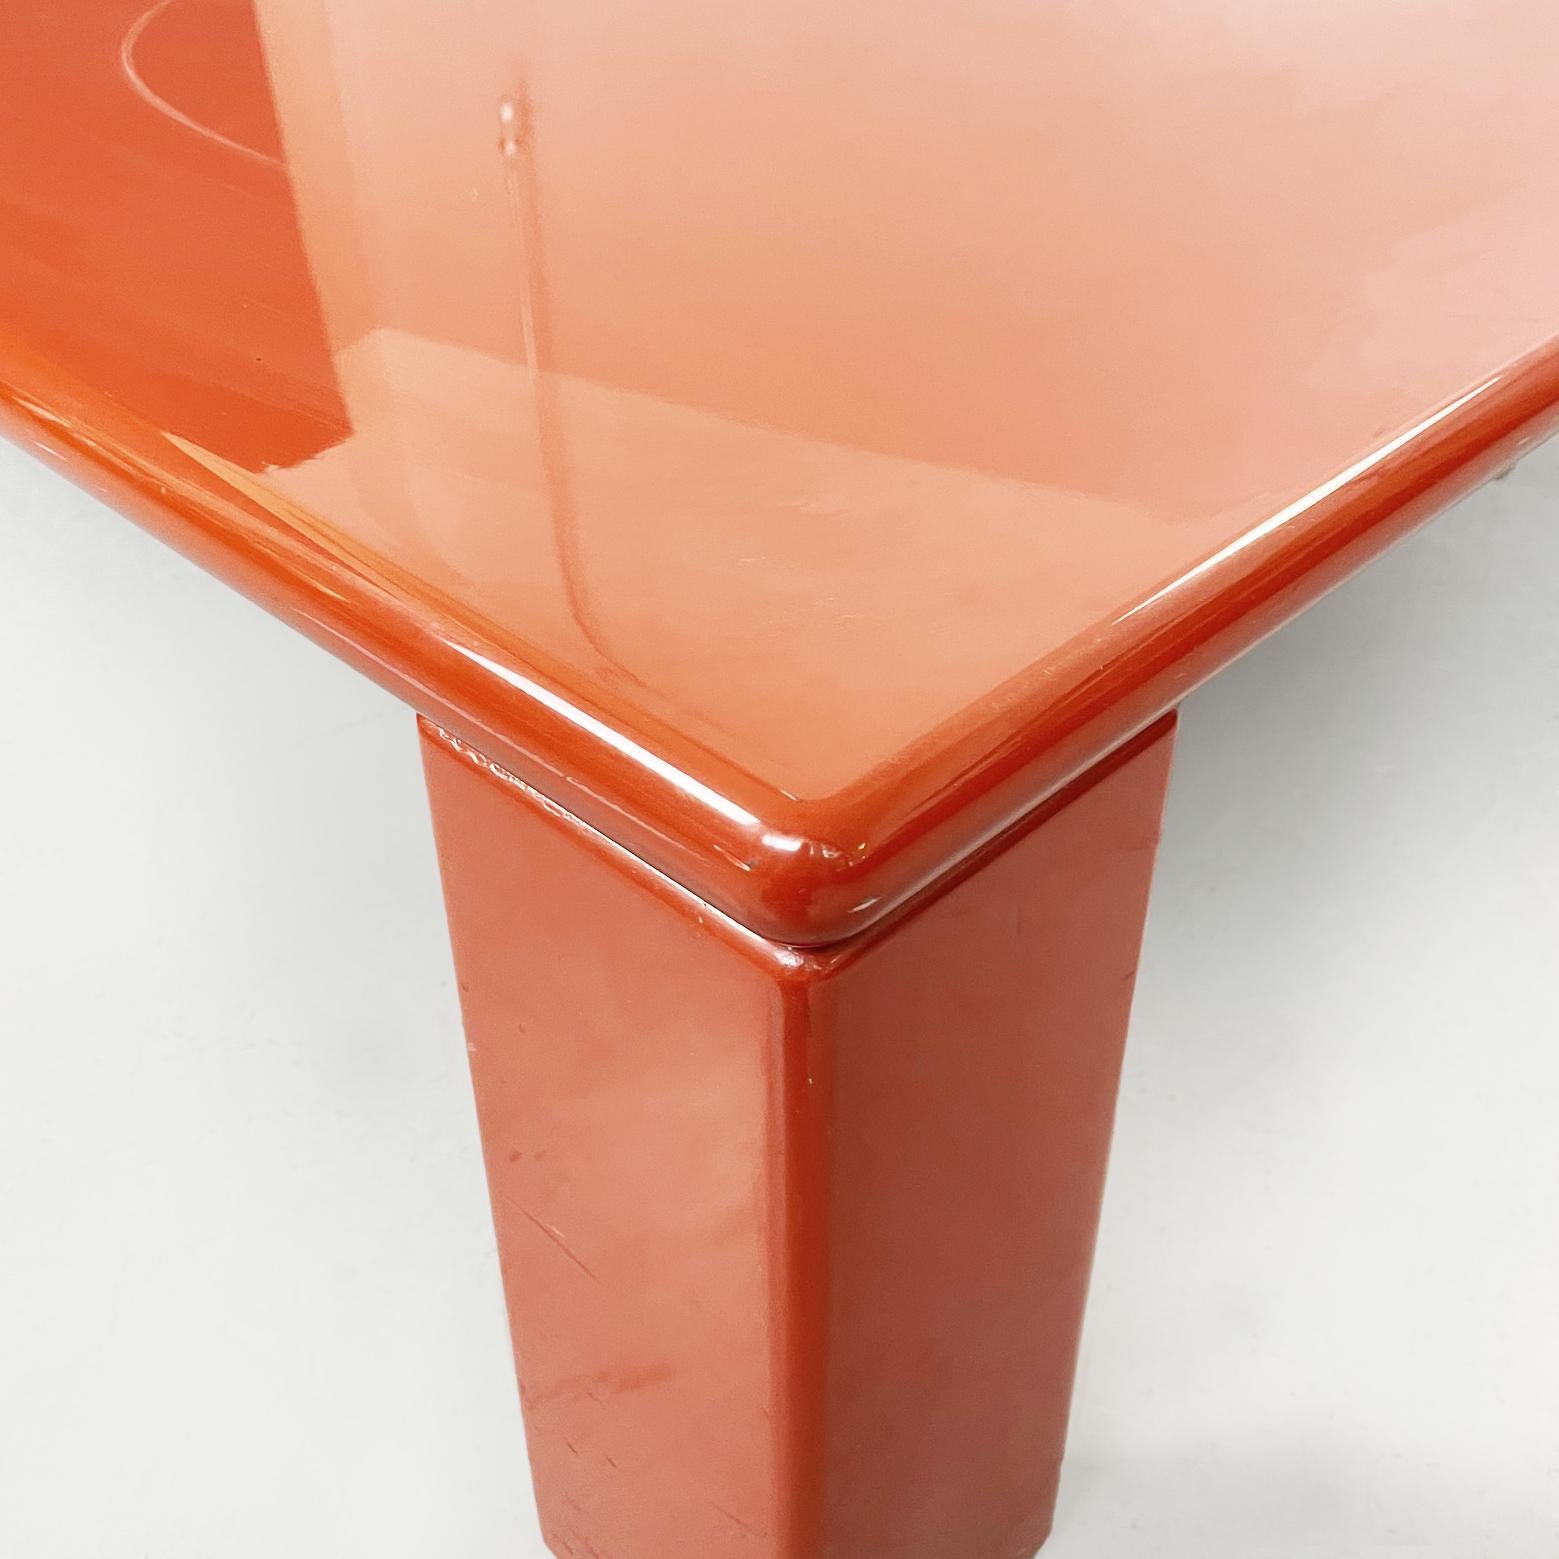 Lacquered Italian Mid-Century Red Wooden Coffee Table Ming by Takahama Gavina, 1980s